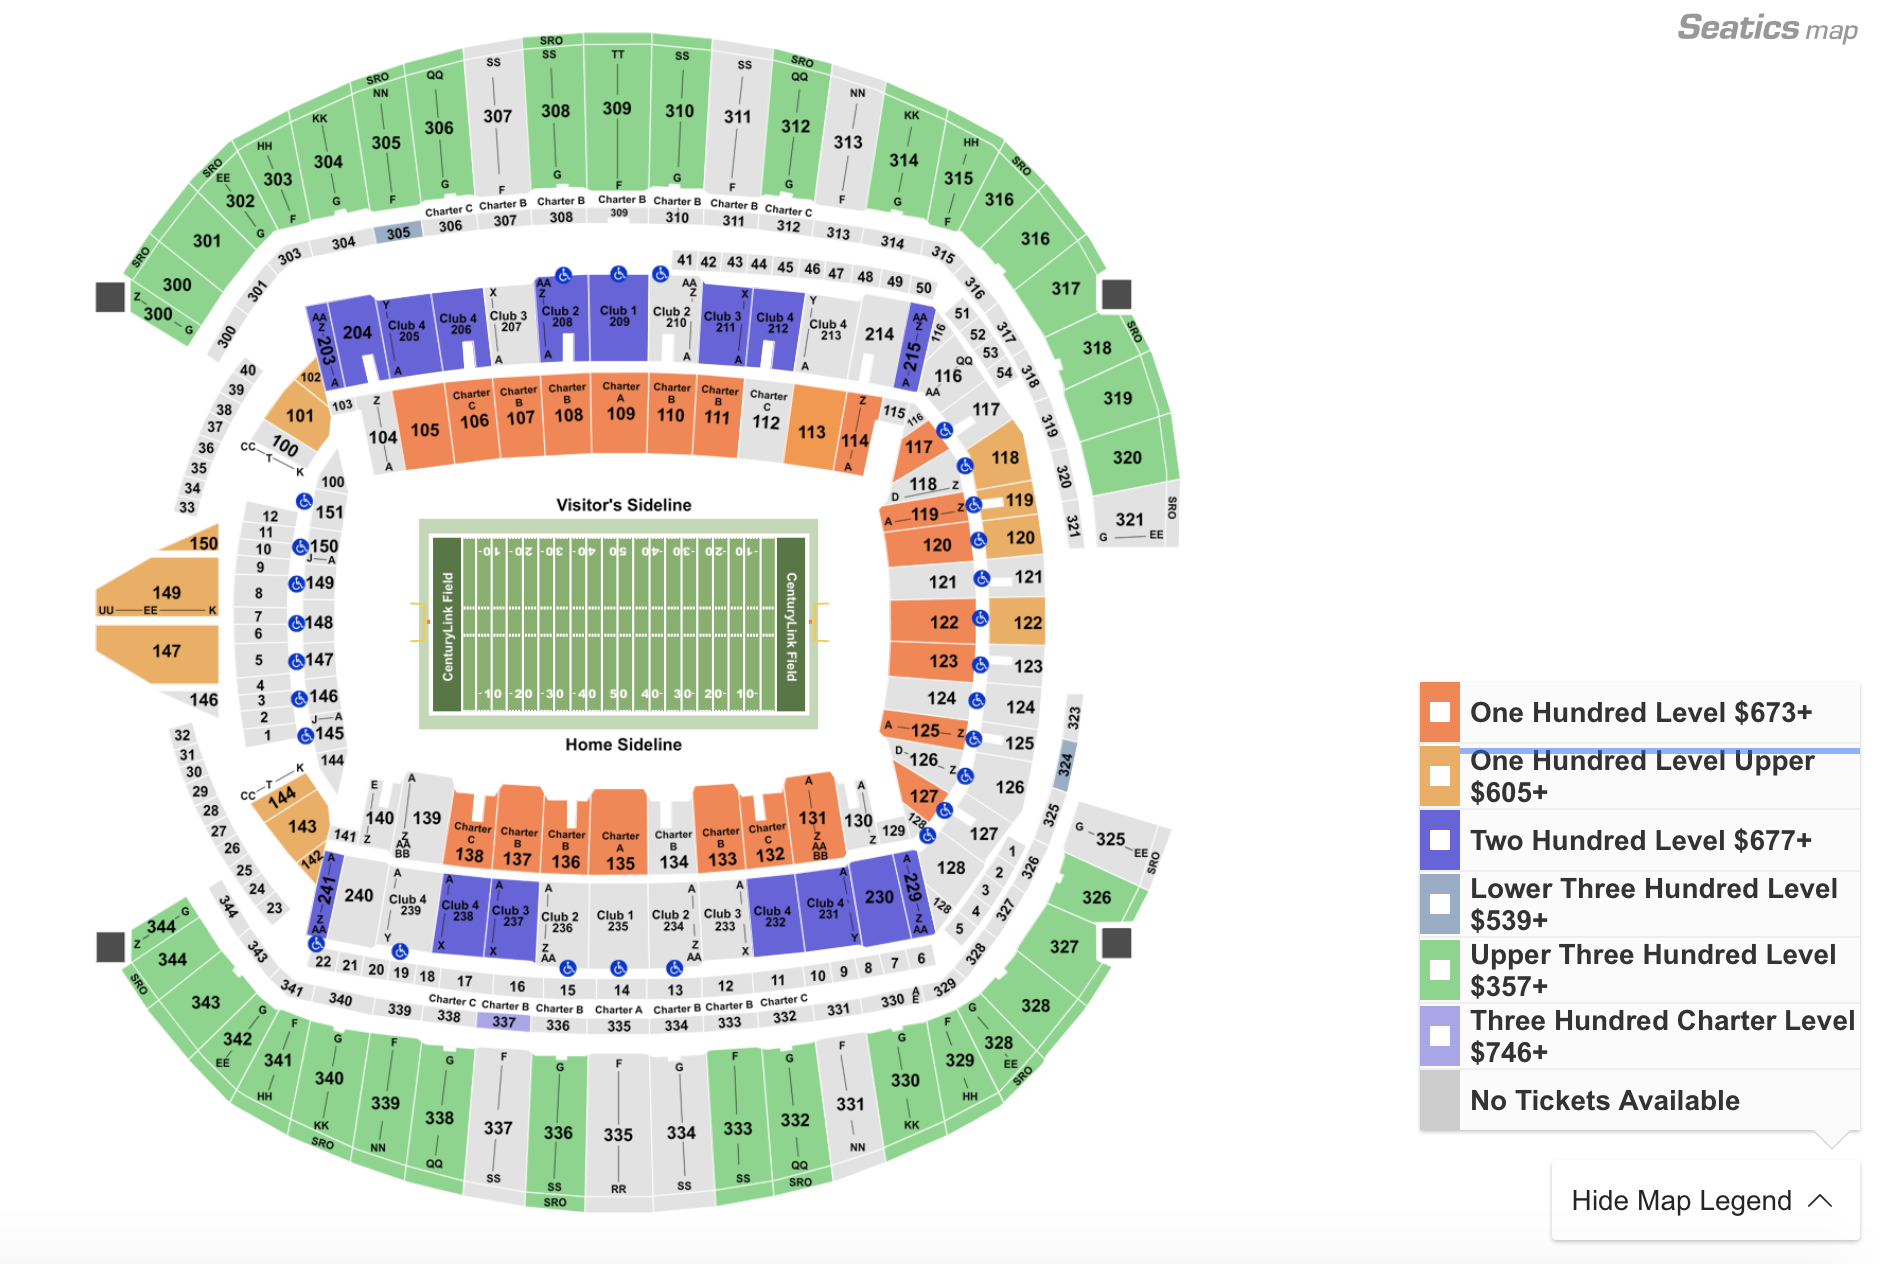 How To Find The Cheapest Seahawks Vs. 49ers Tickets on 12/29/19